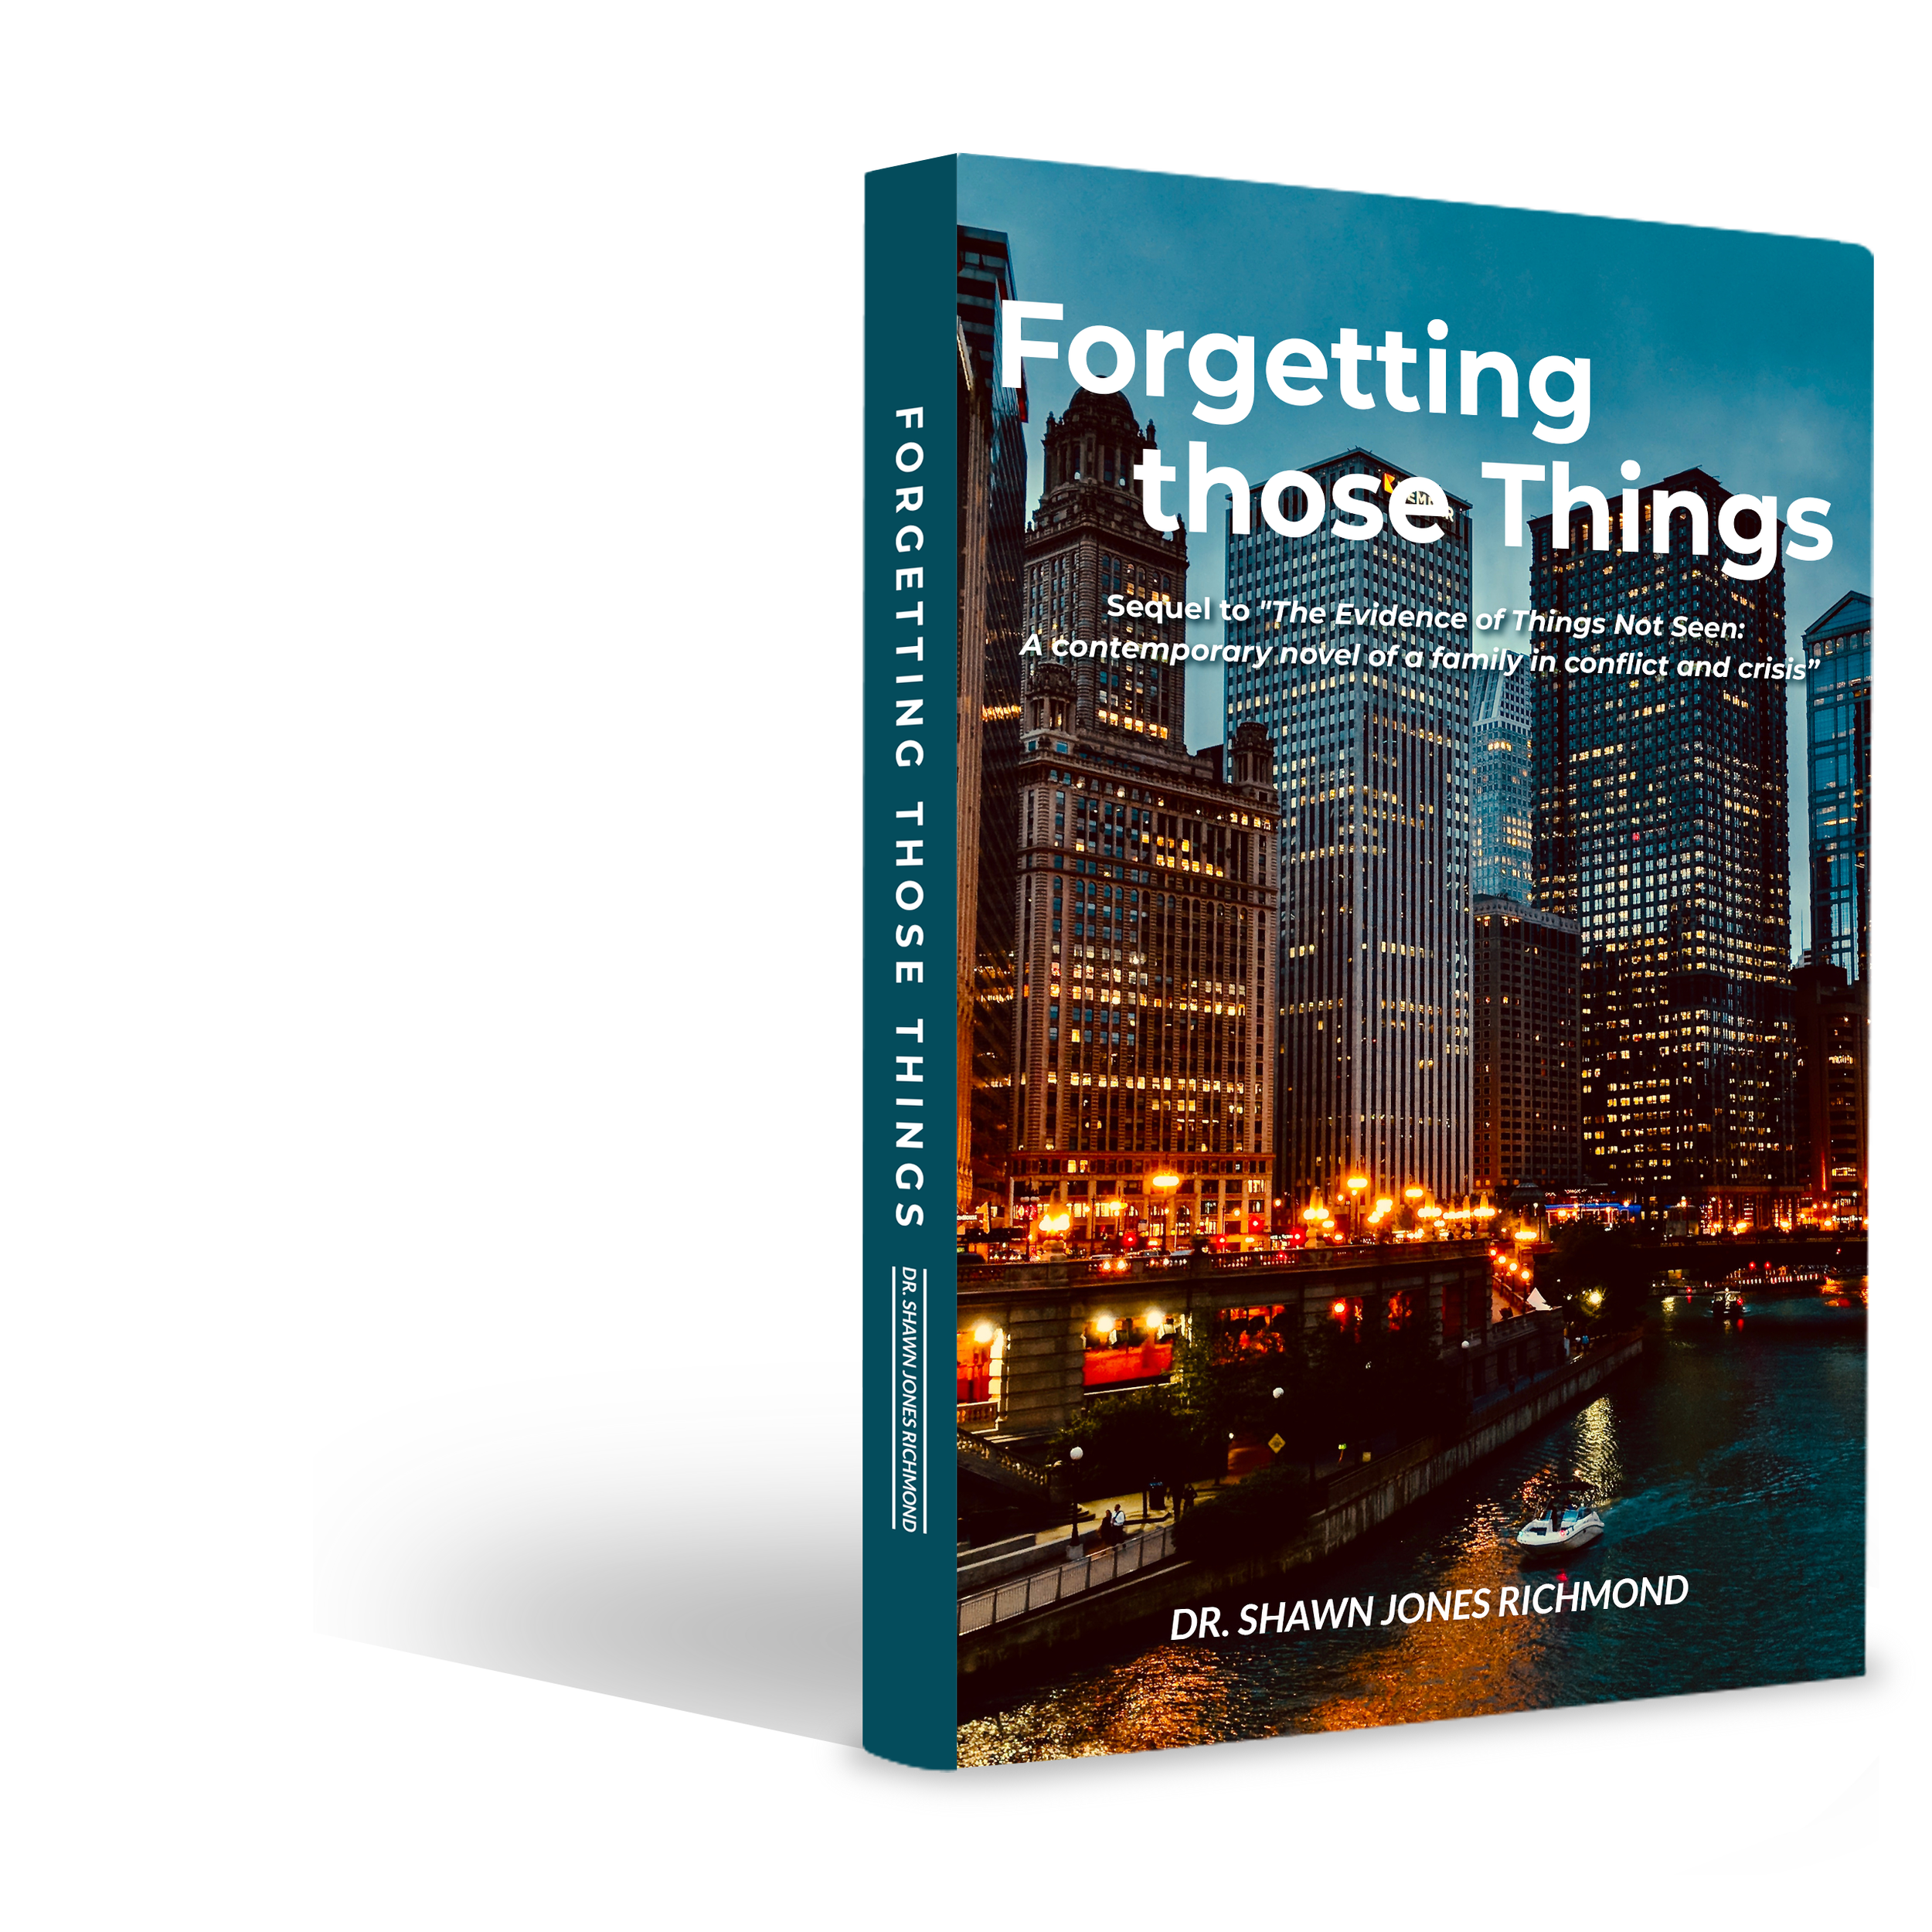 (Novel) Forgetting those Things (Book 2 of 2)